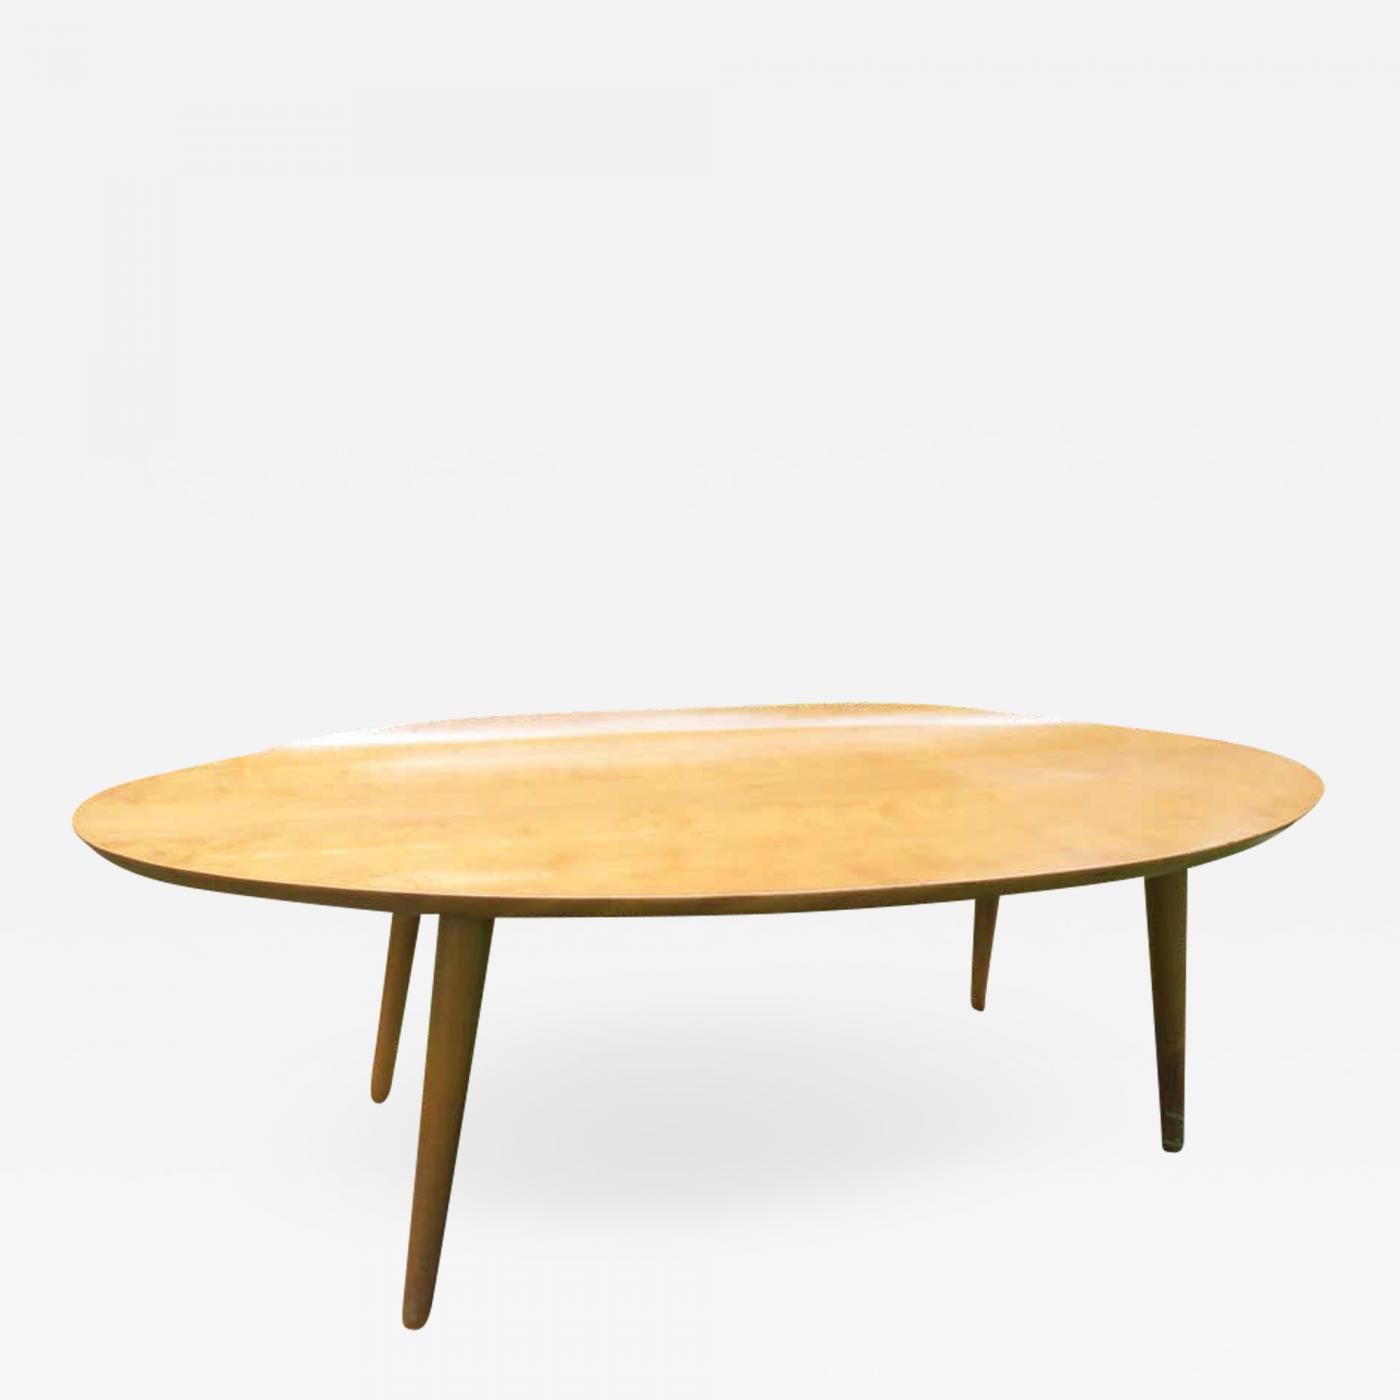 Conant Ball Lovely Conant Ball Curved Oval Top Surfboard Coffee Table By Russel Wright